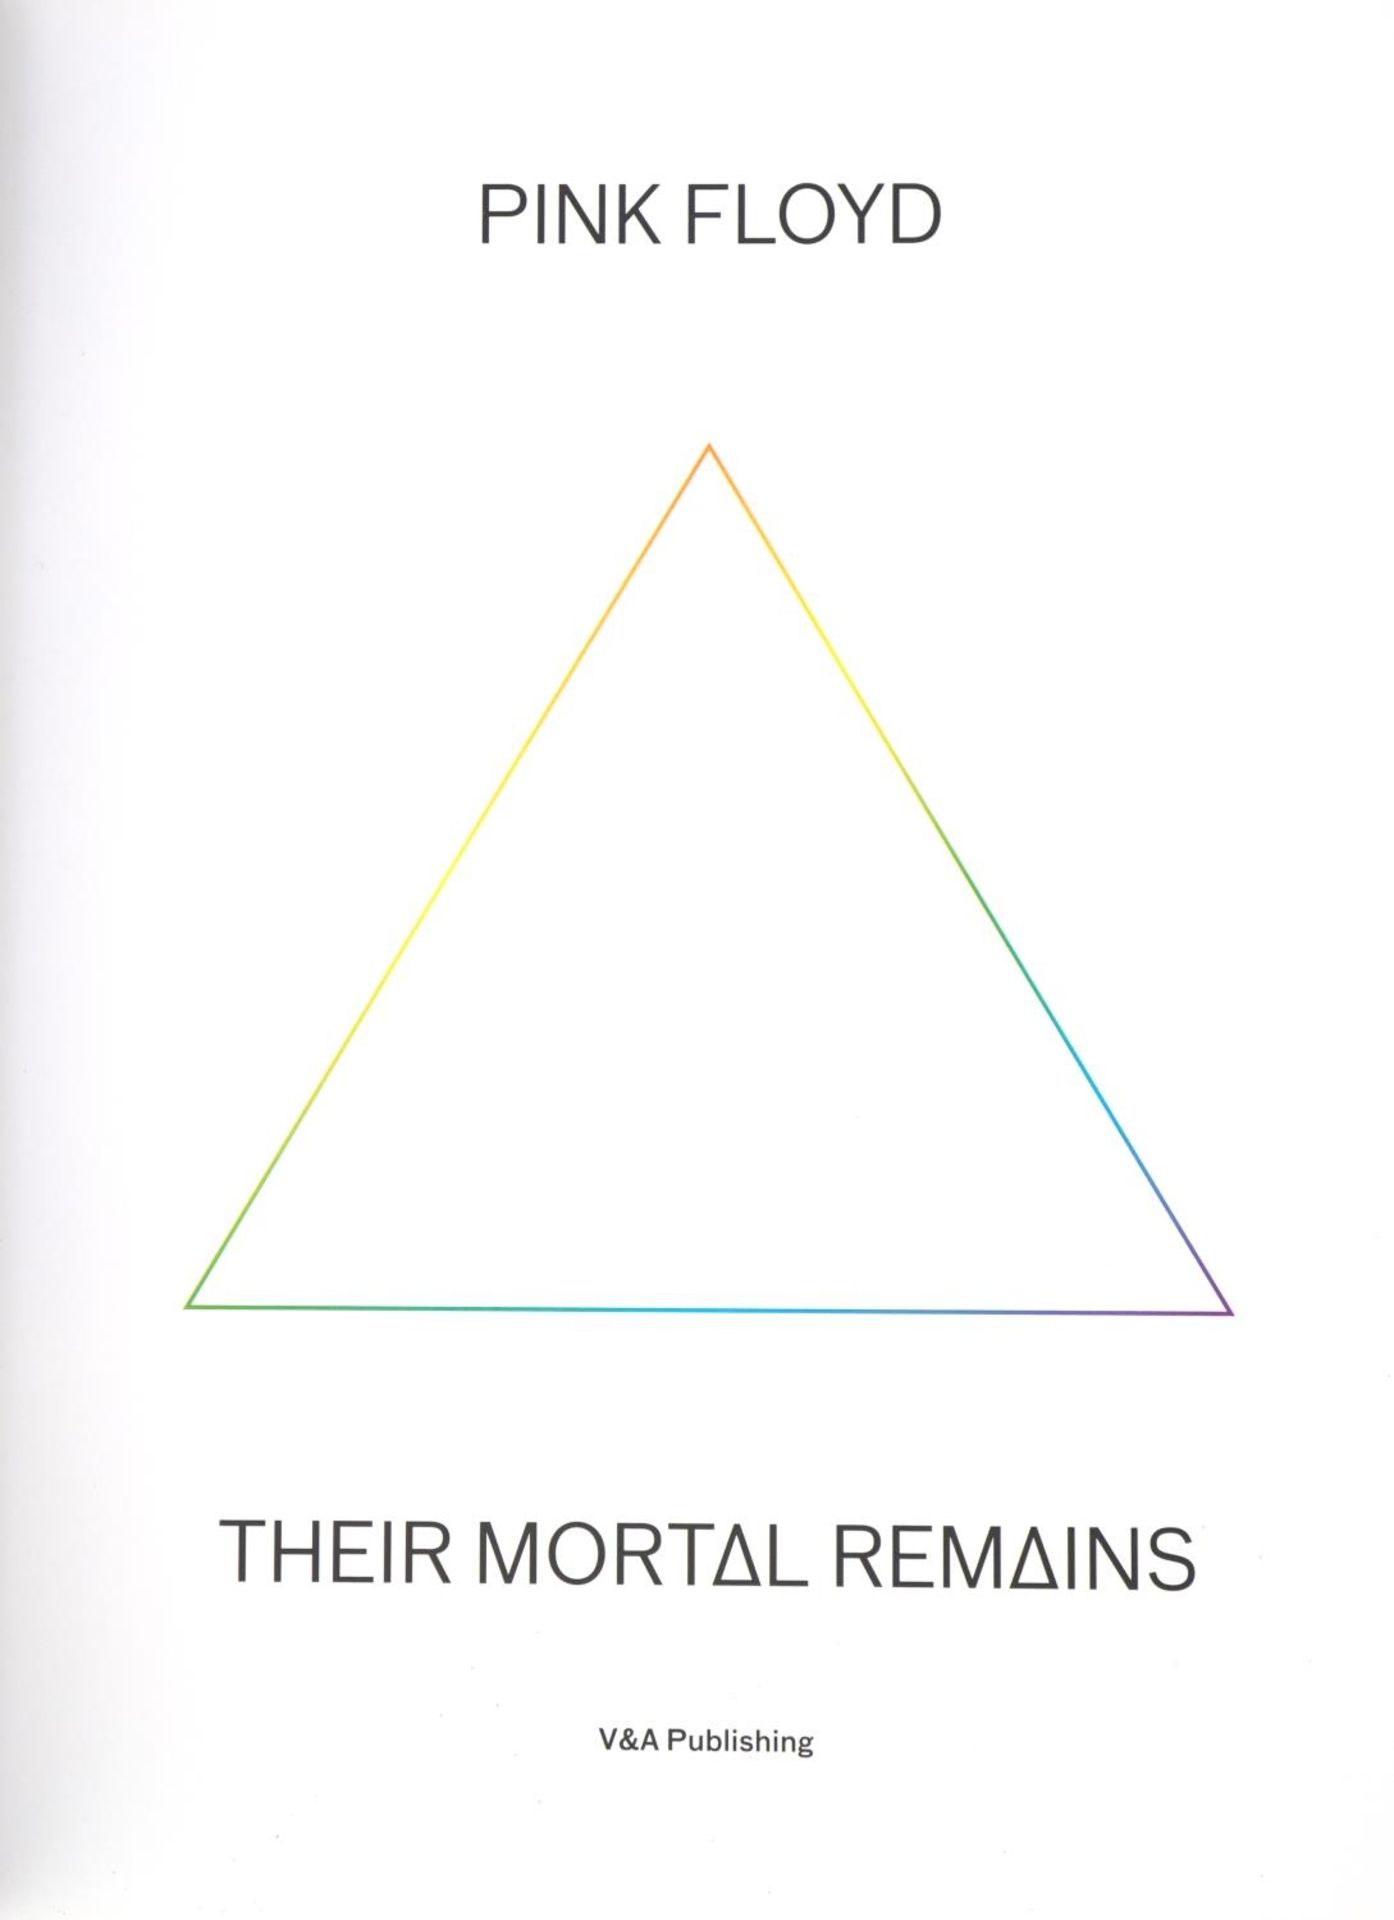 Pink Floyd - Their Immortal Remains catalogue published by The V & A with a holographic cover - Bild 2 aus 6